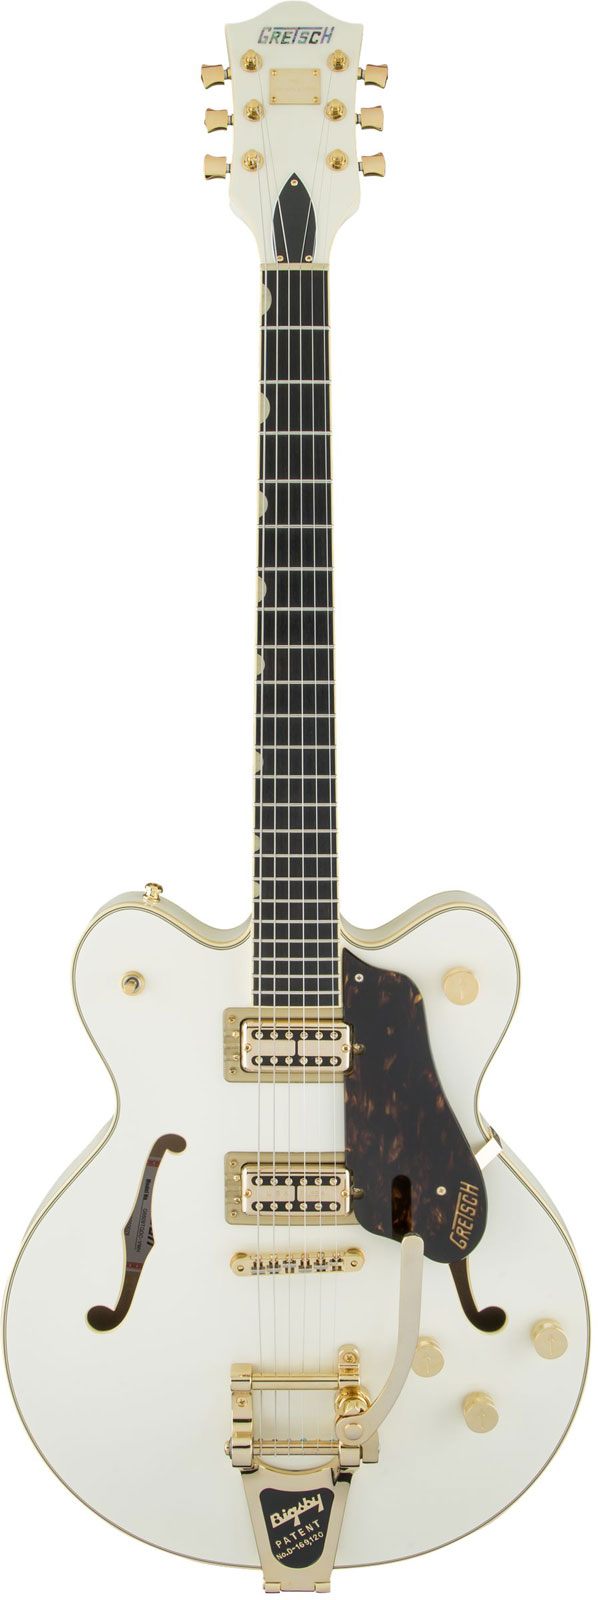 GRETSCH GUITARS G6609TG PLAYERS EDITION BROADKASTER CENTER BLOCK DOUBLE-CUT WITH STRING-THRU BIGSBY AND GOLD HARDWAR